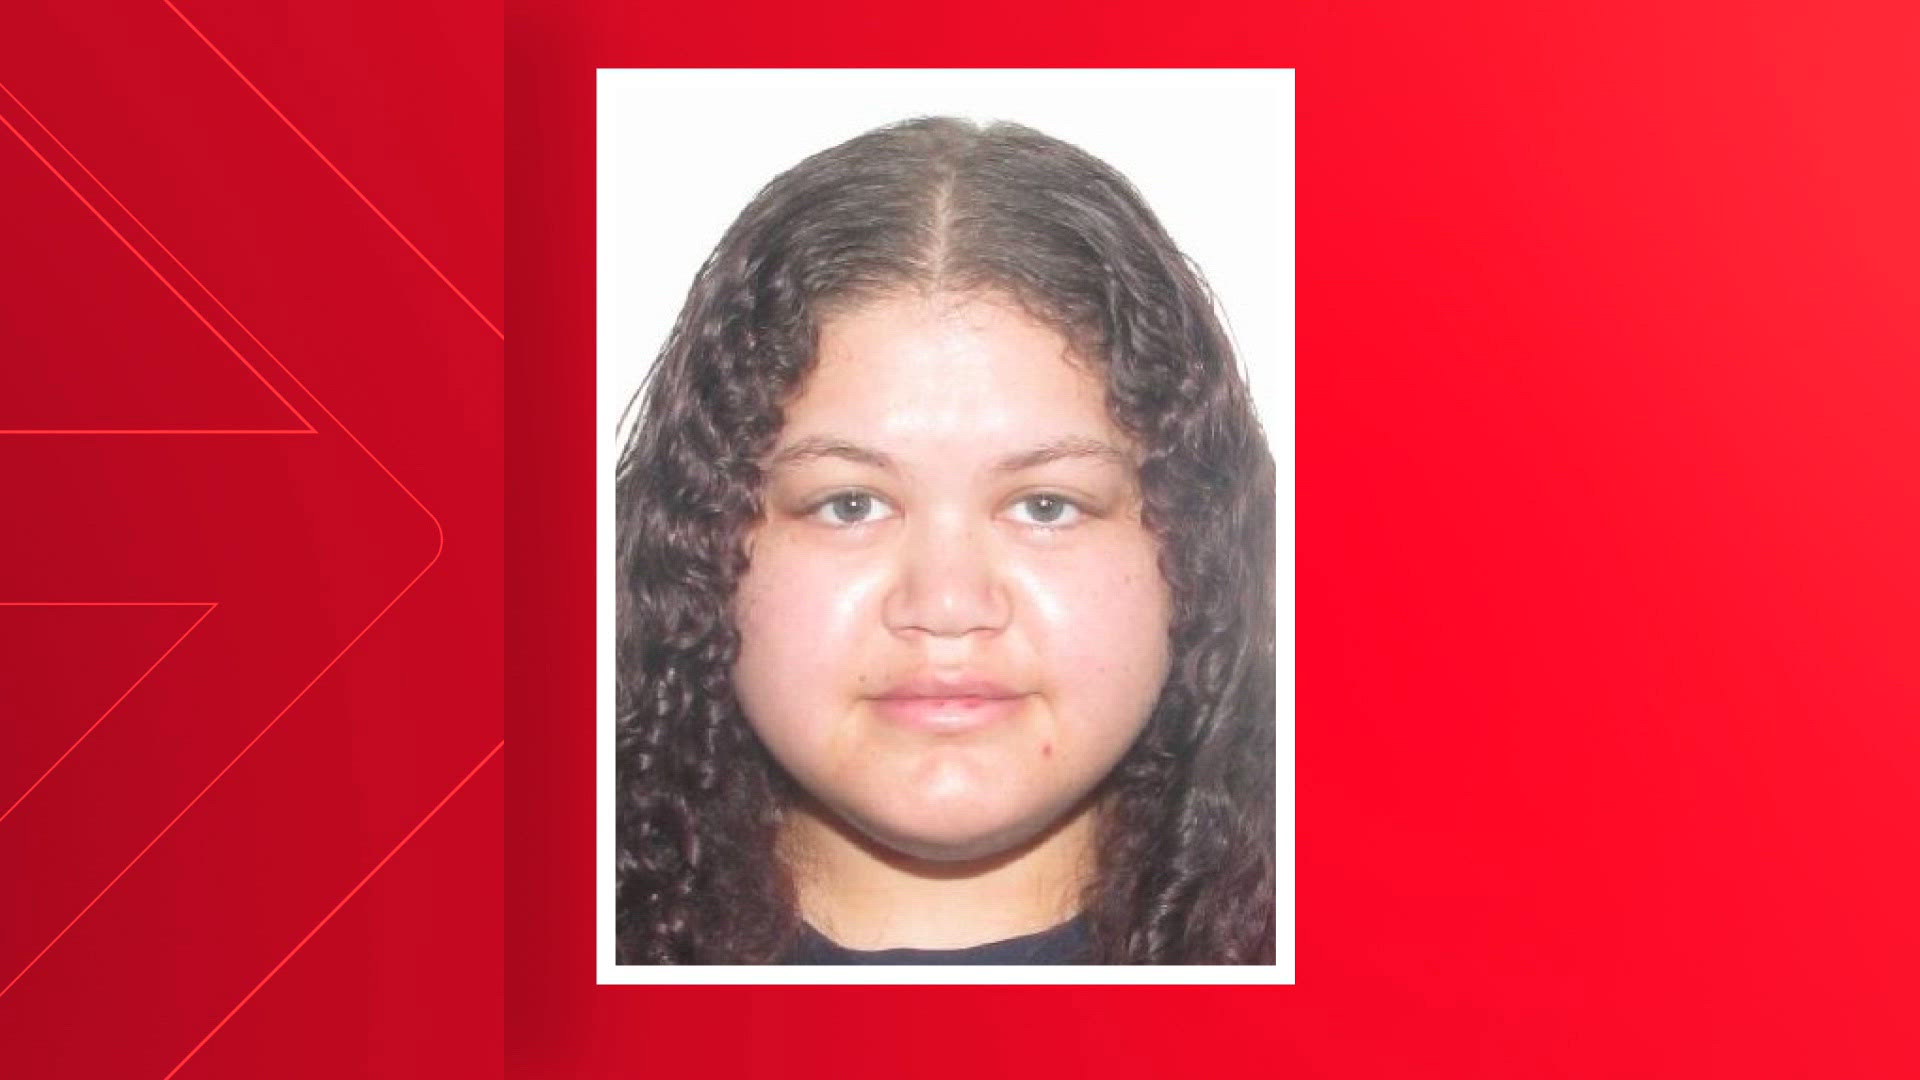 The 23-year-old has been on the run for days after the bodies of her roommates were found inside their Fredericksburg home.